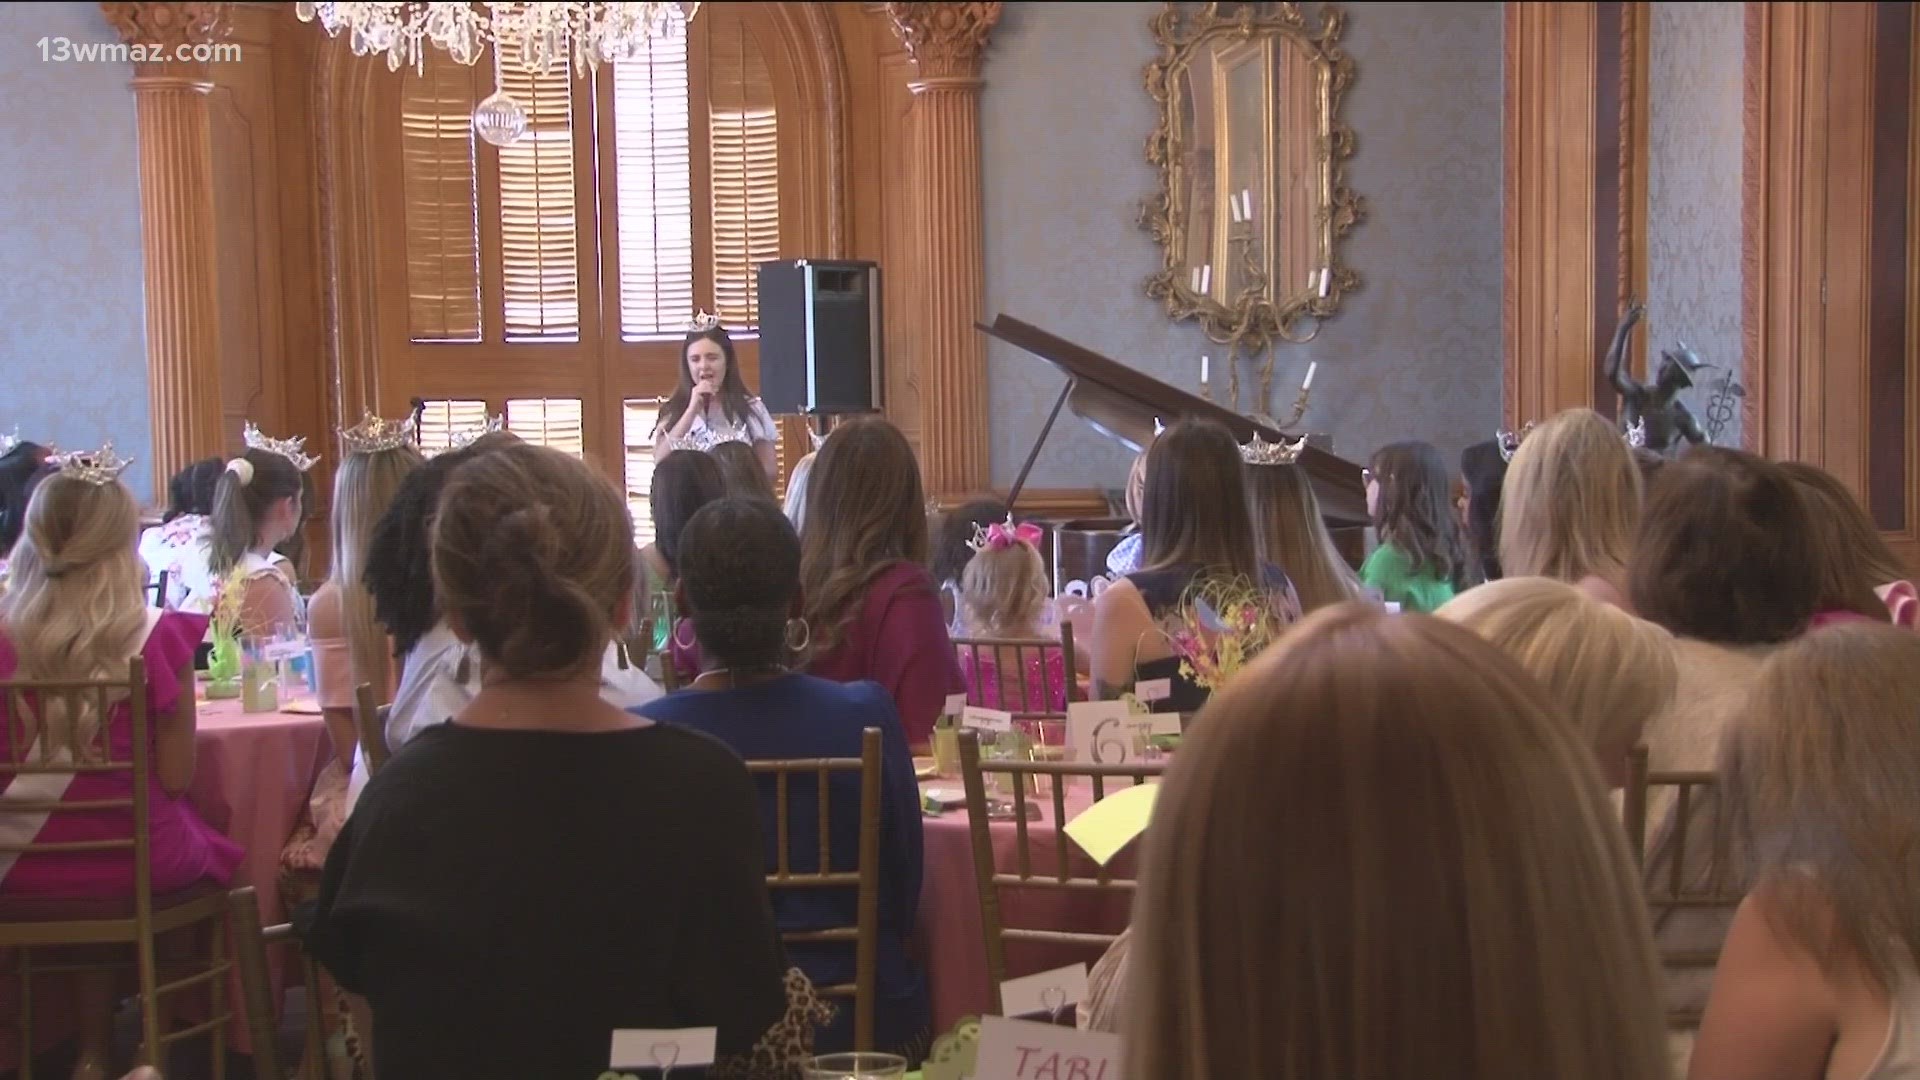 The event honors young ladies 5- to-12-years-old joining the Miss Georgia Princess Program.